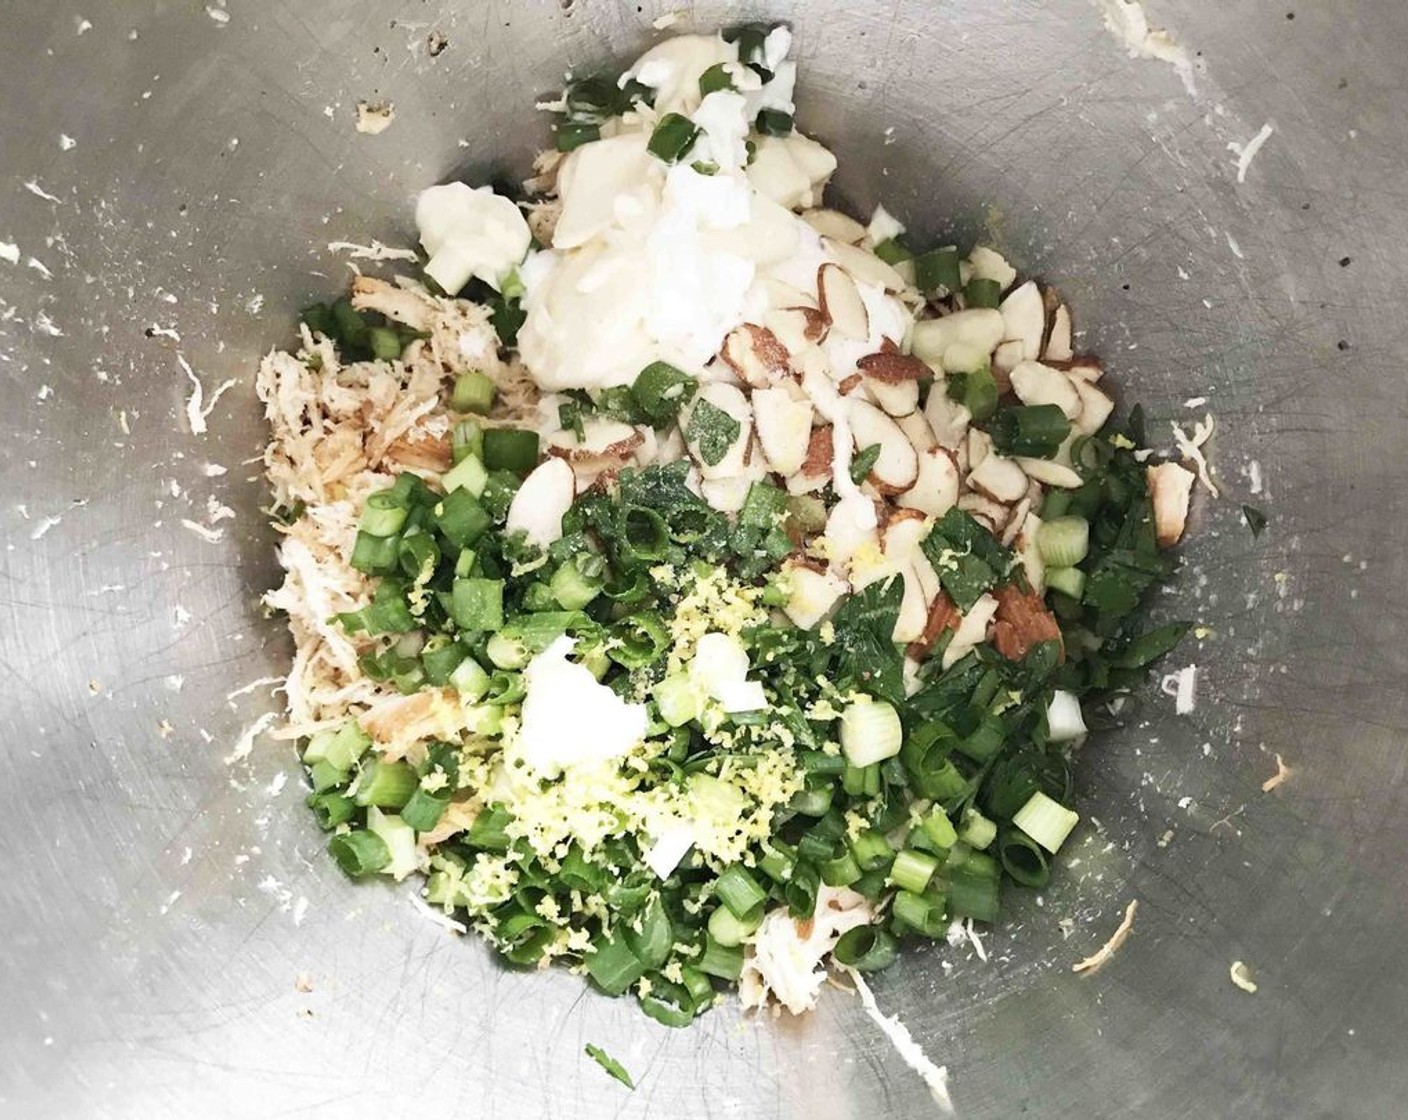 step 4 Allow the chicken to cool slightly before mixing with Fat-Free Greek Yogurt (3/4 cup), Almonds (1/2 cup), Fresh Parsley (1/4 cup), Scallion (1 bunch), Light Mayonnaise (2 Tbsp), and zest and juice from the Lemon (1/2)